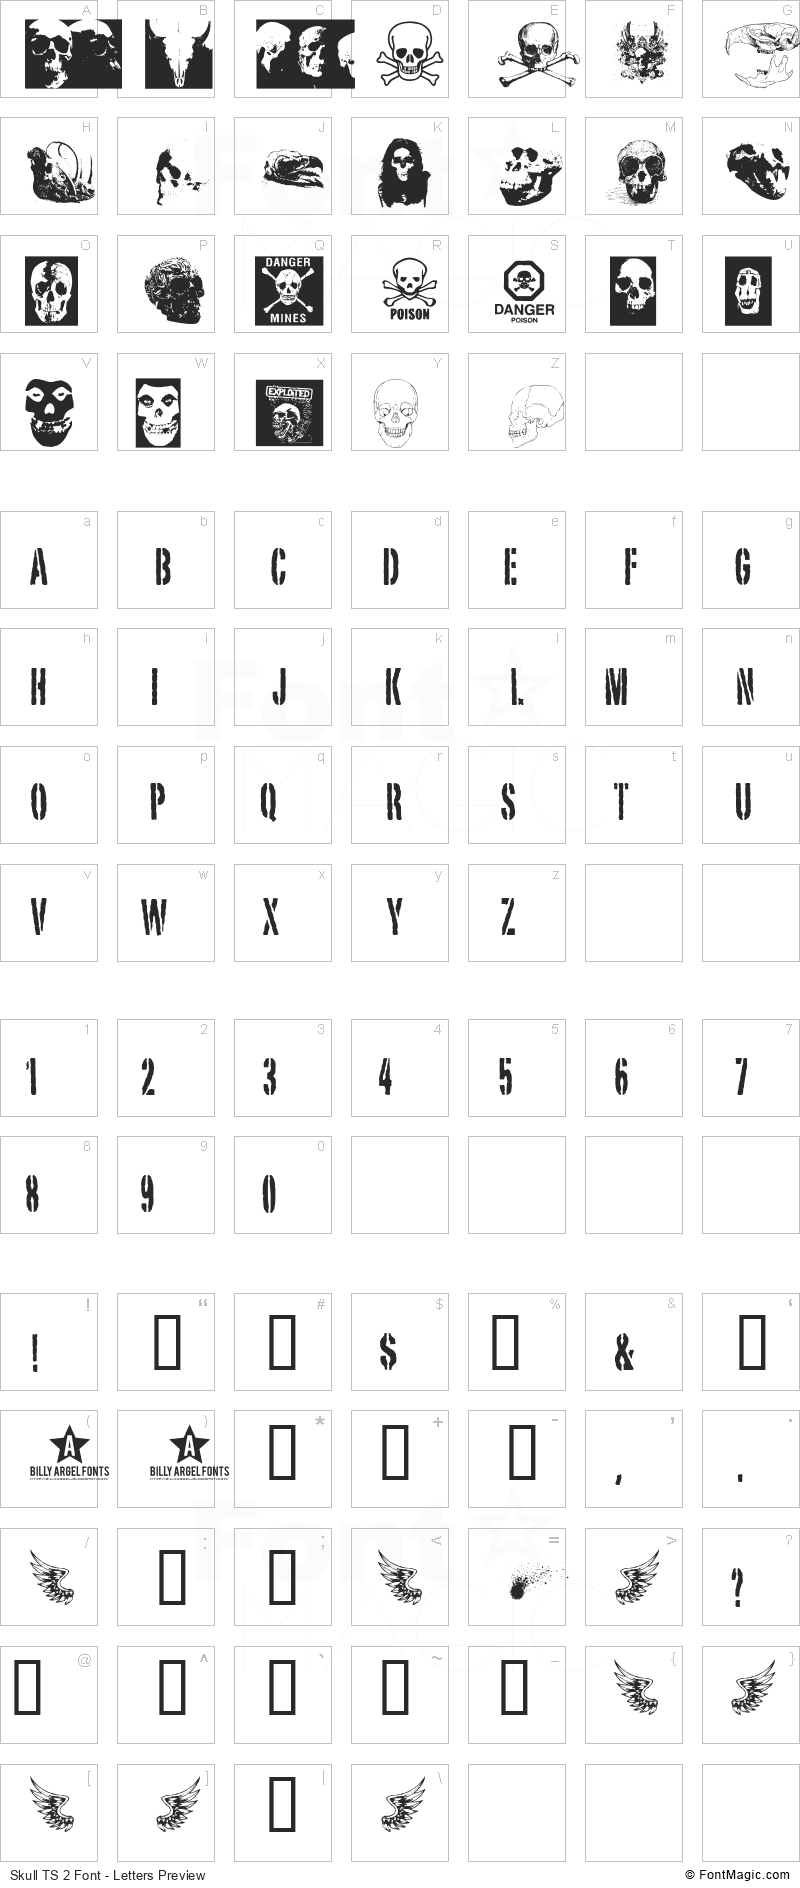 Skull TS 2 Font - All Latters Preview Chart